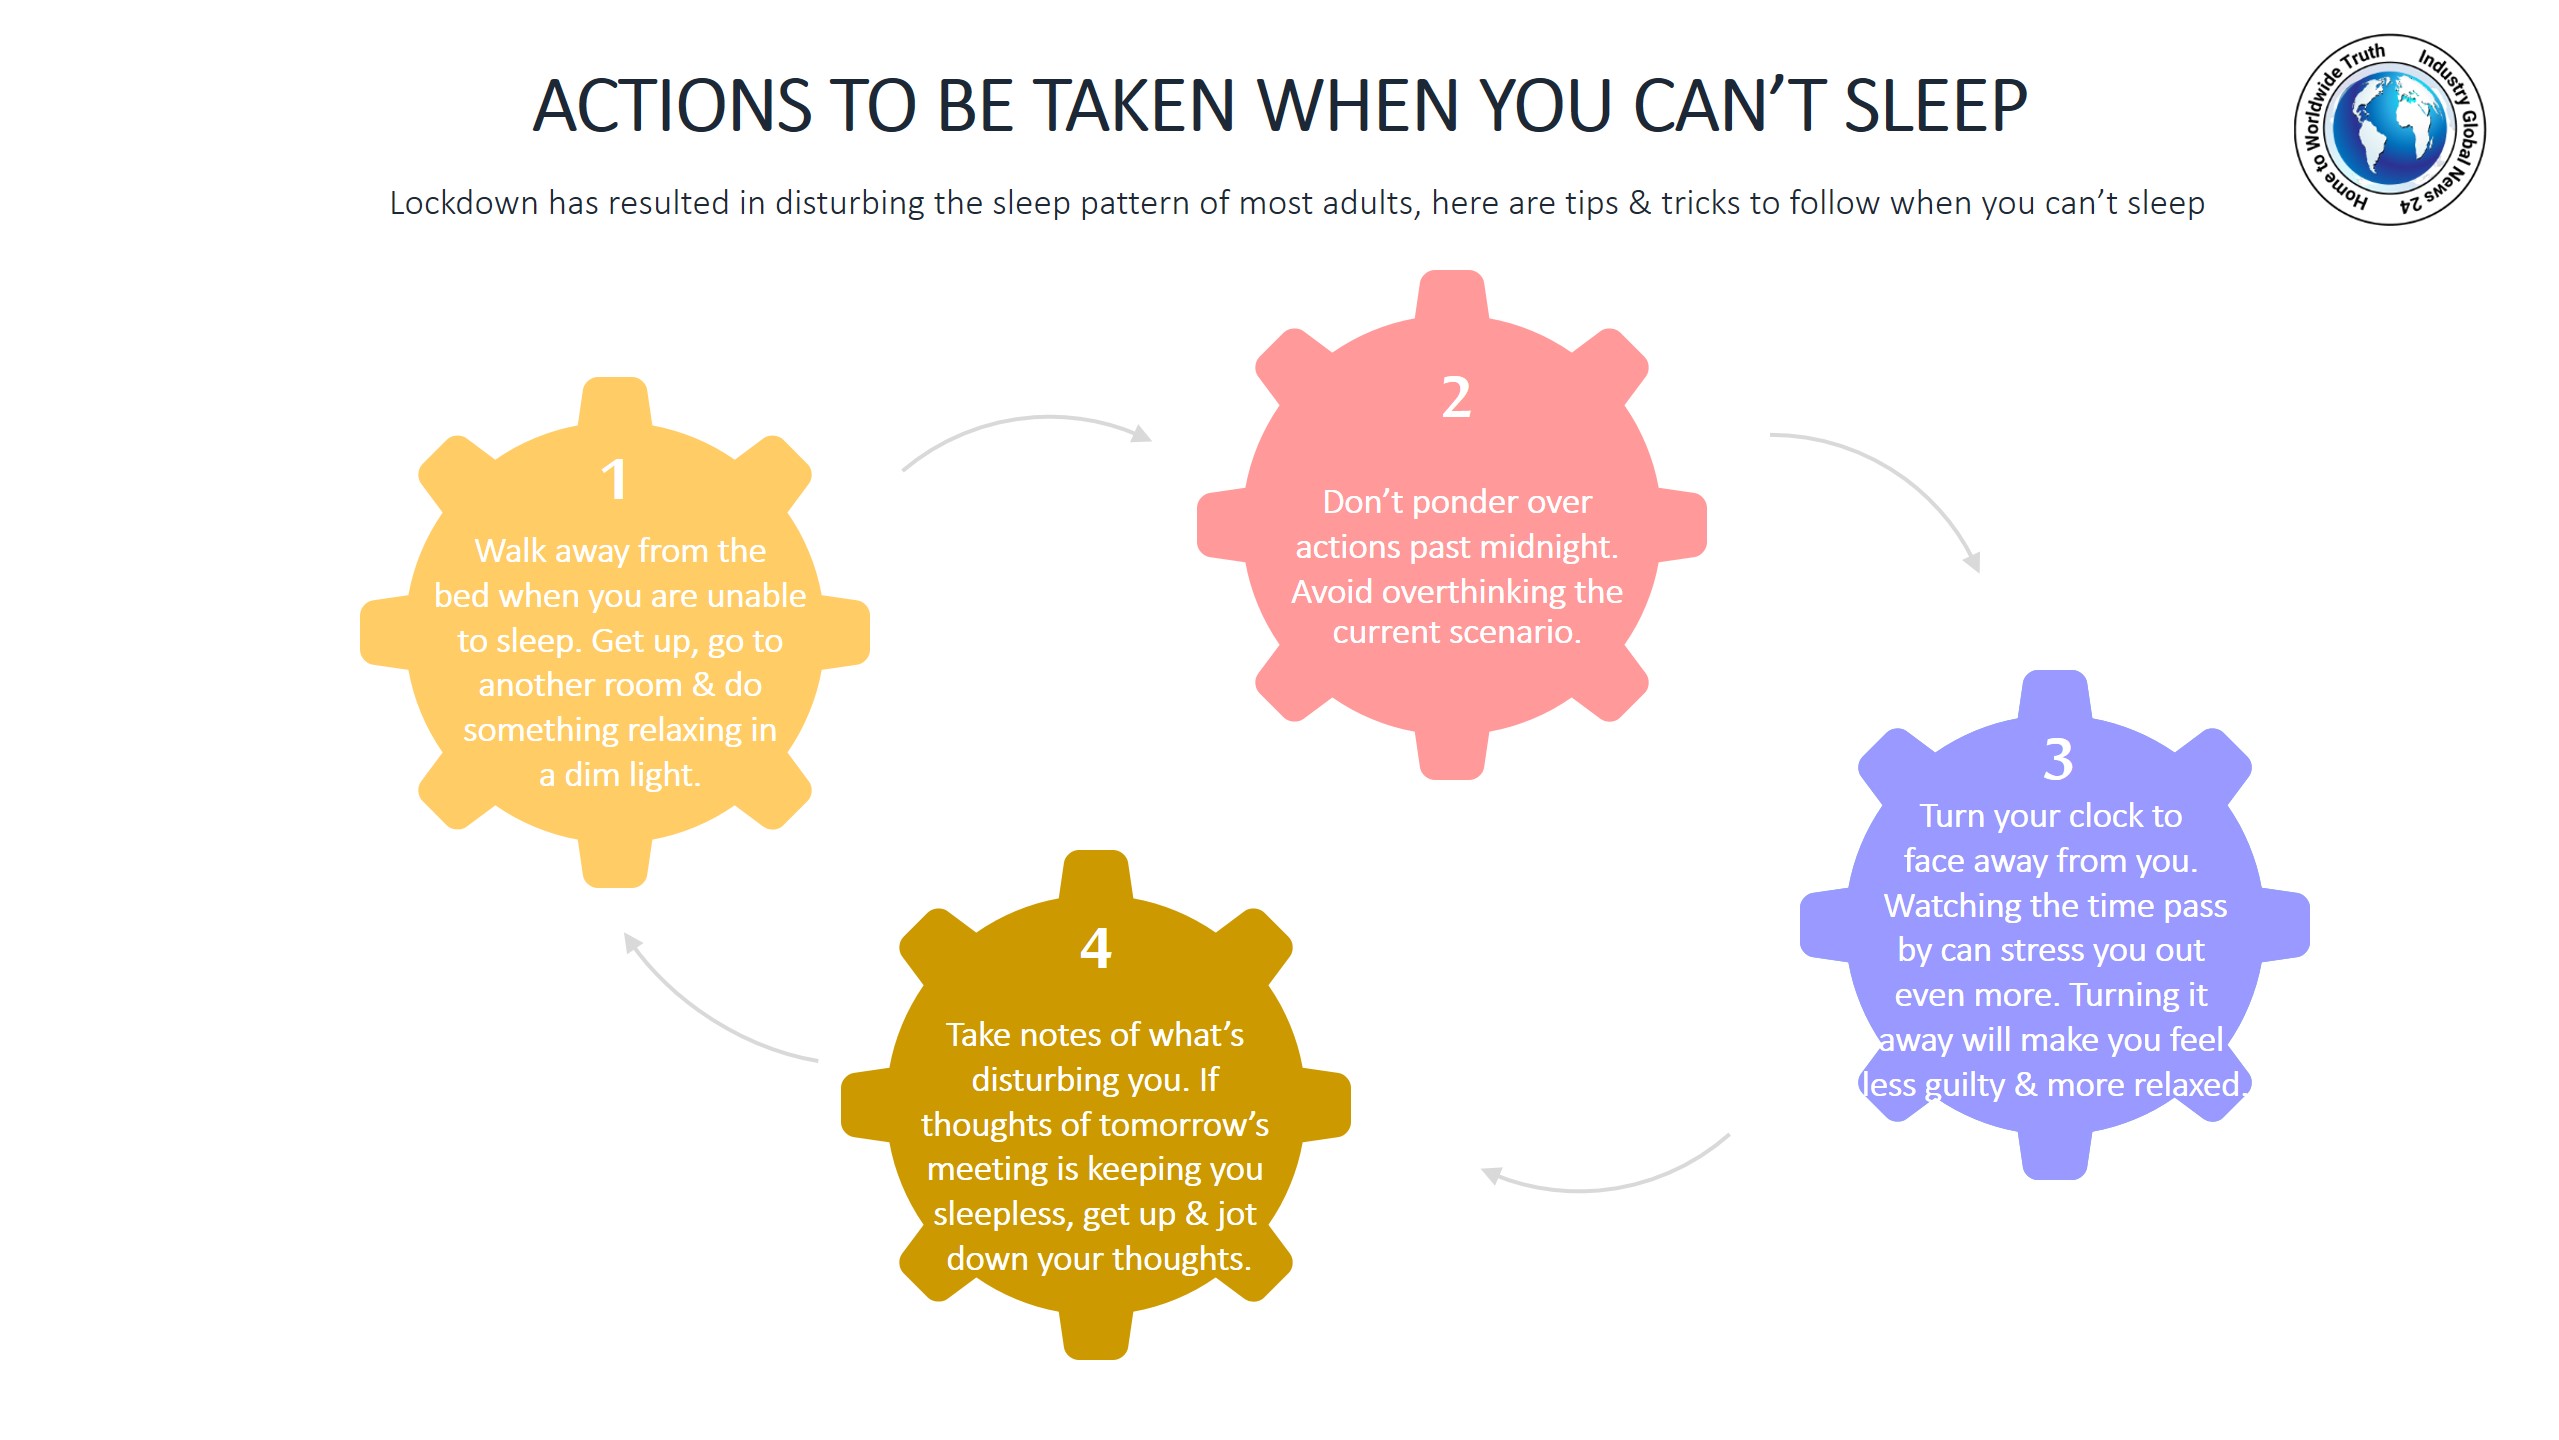 Actions to be taken when you can’t sleep